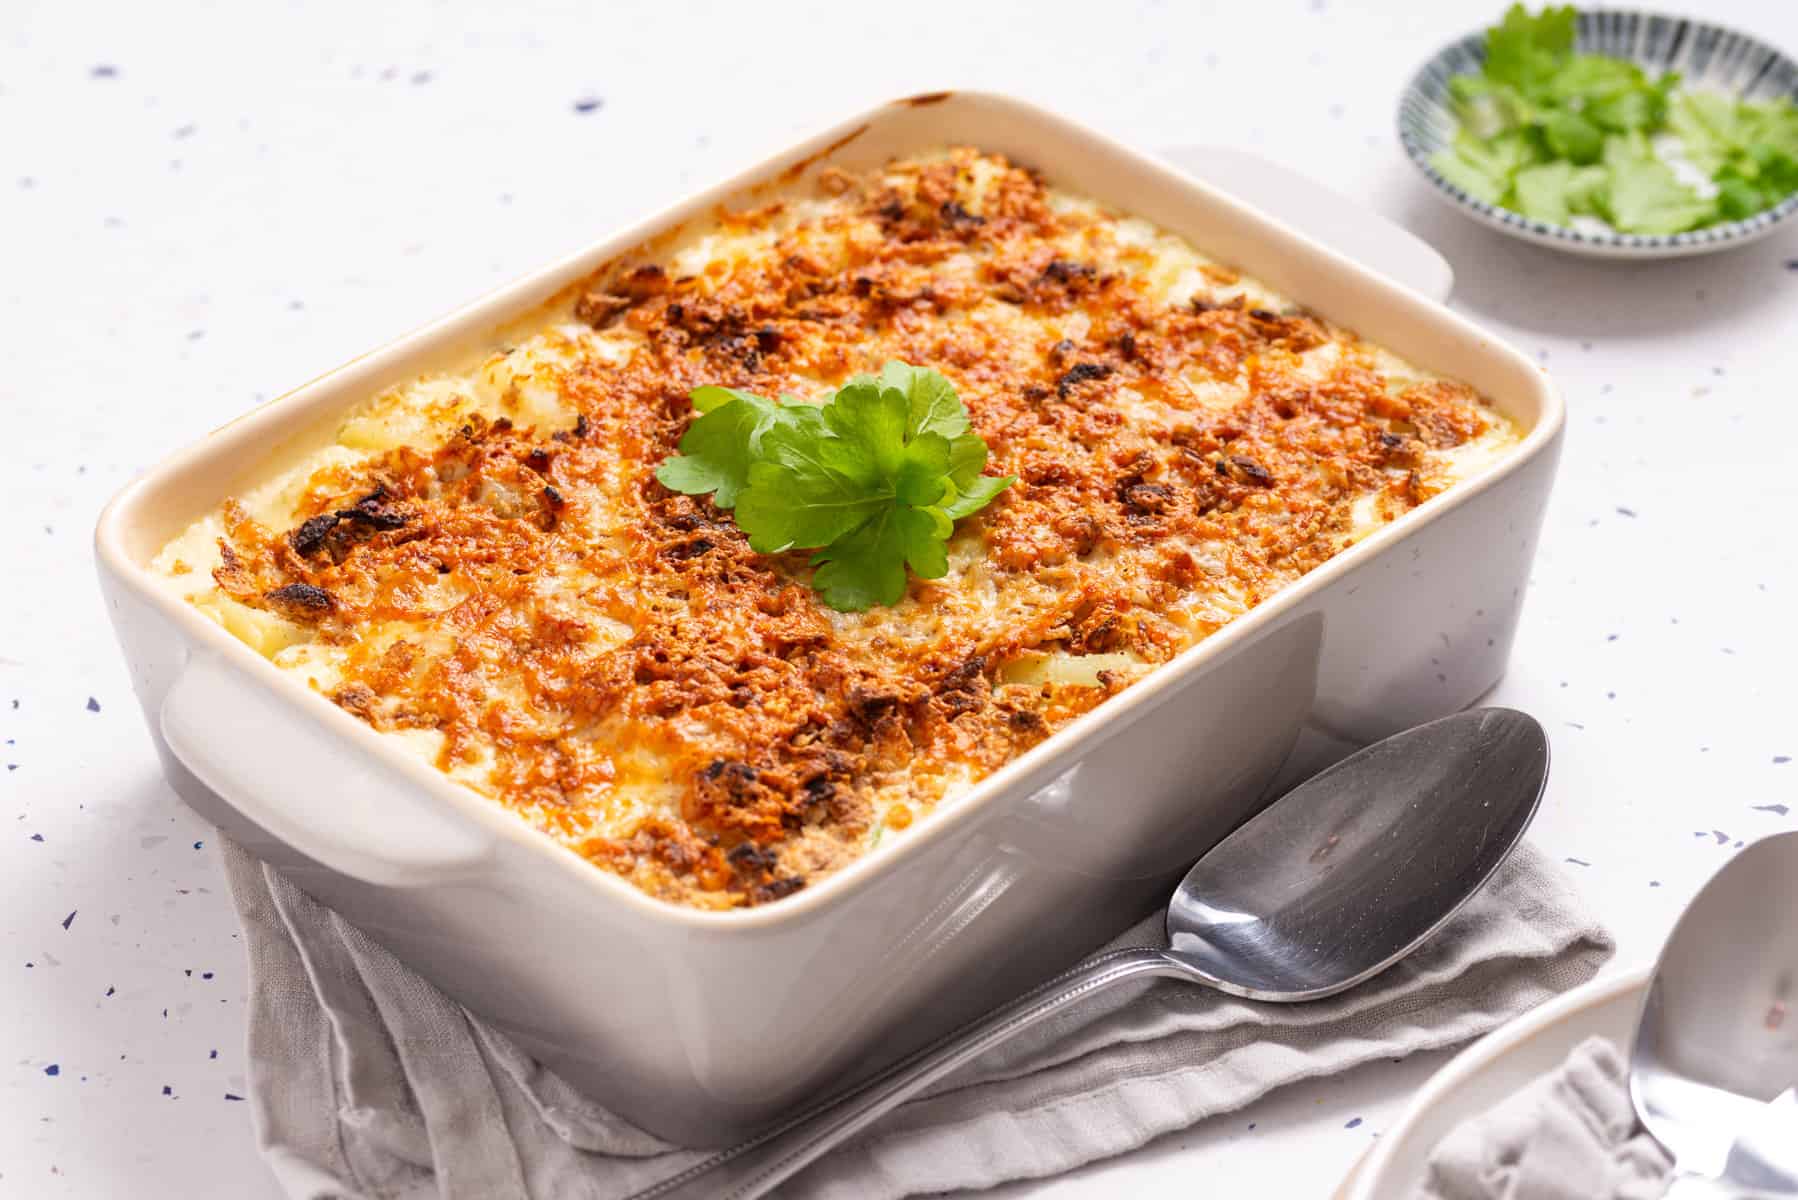 A close up image of cheesy potatoes in a casserole, garnished with parsley.